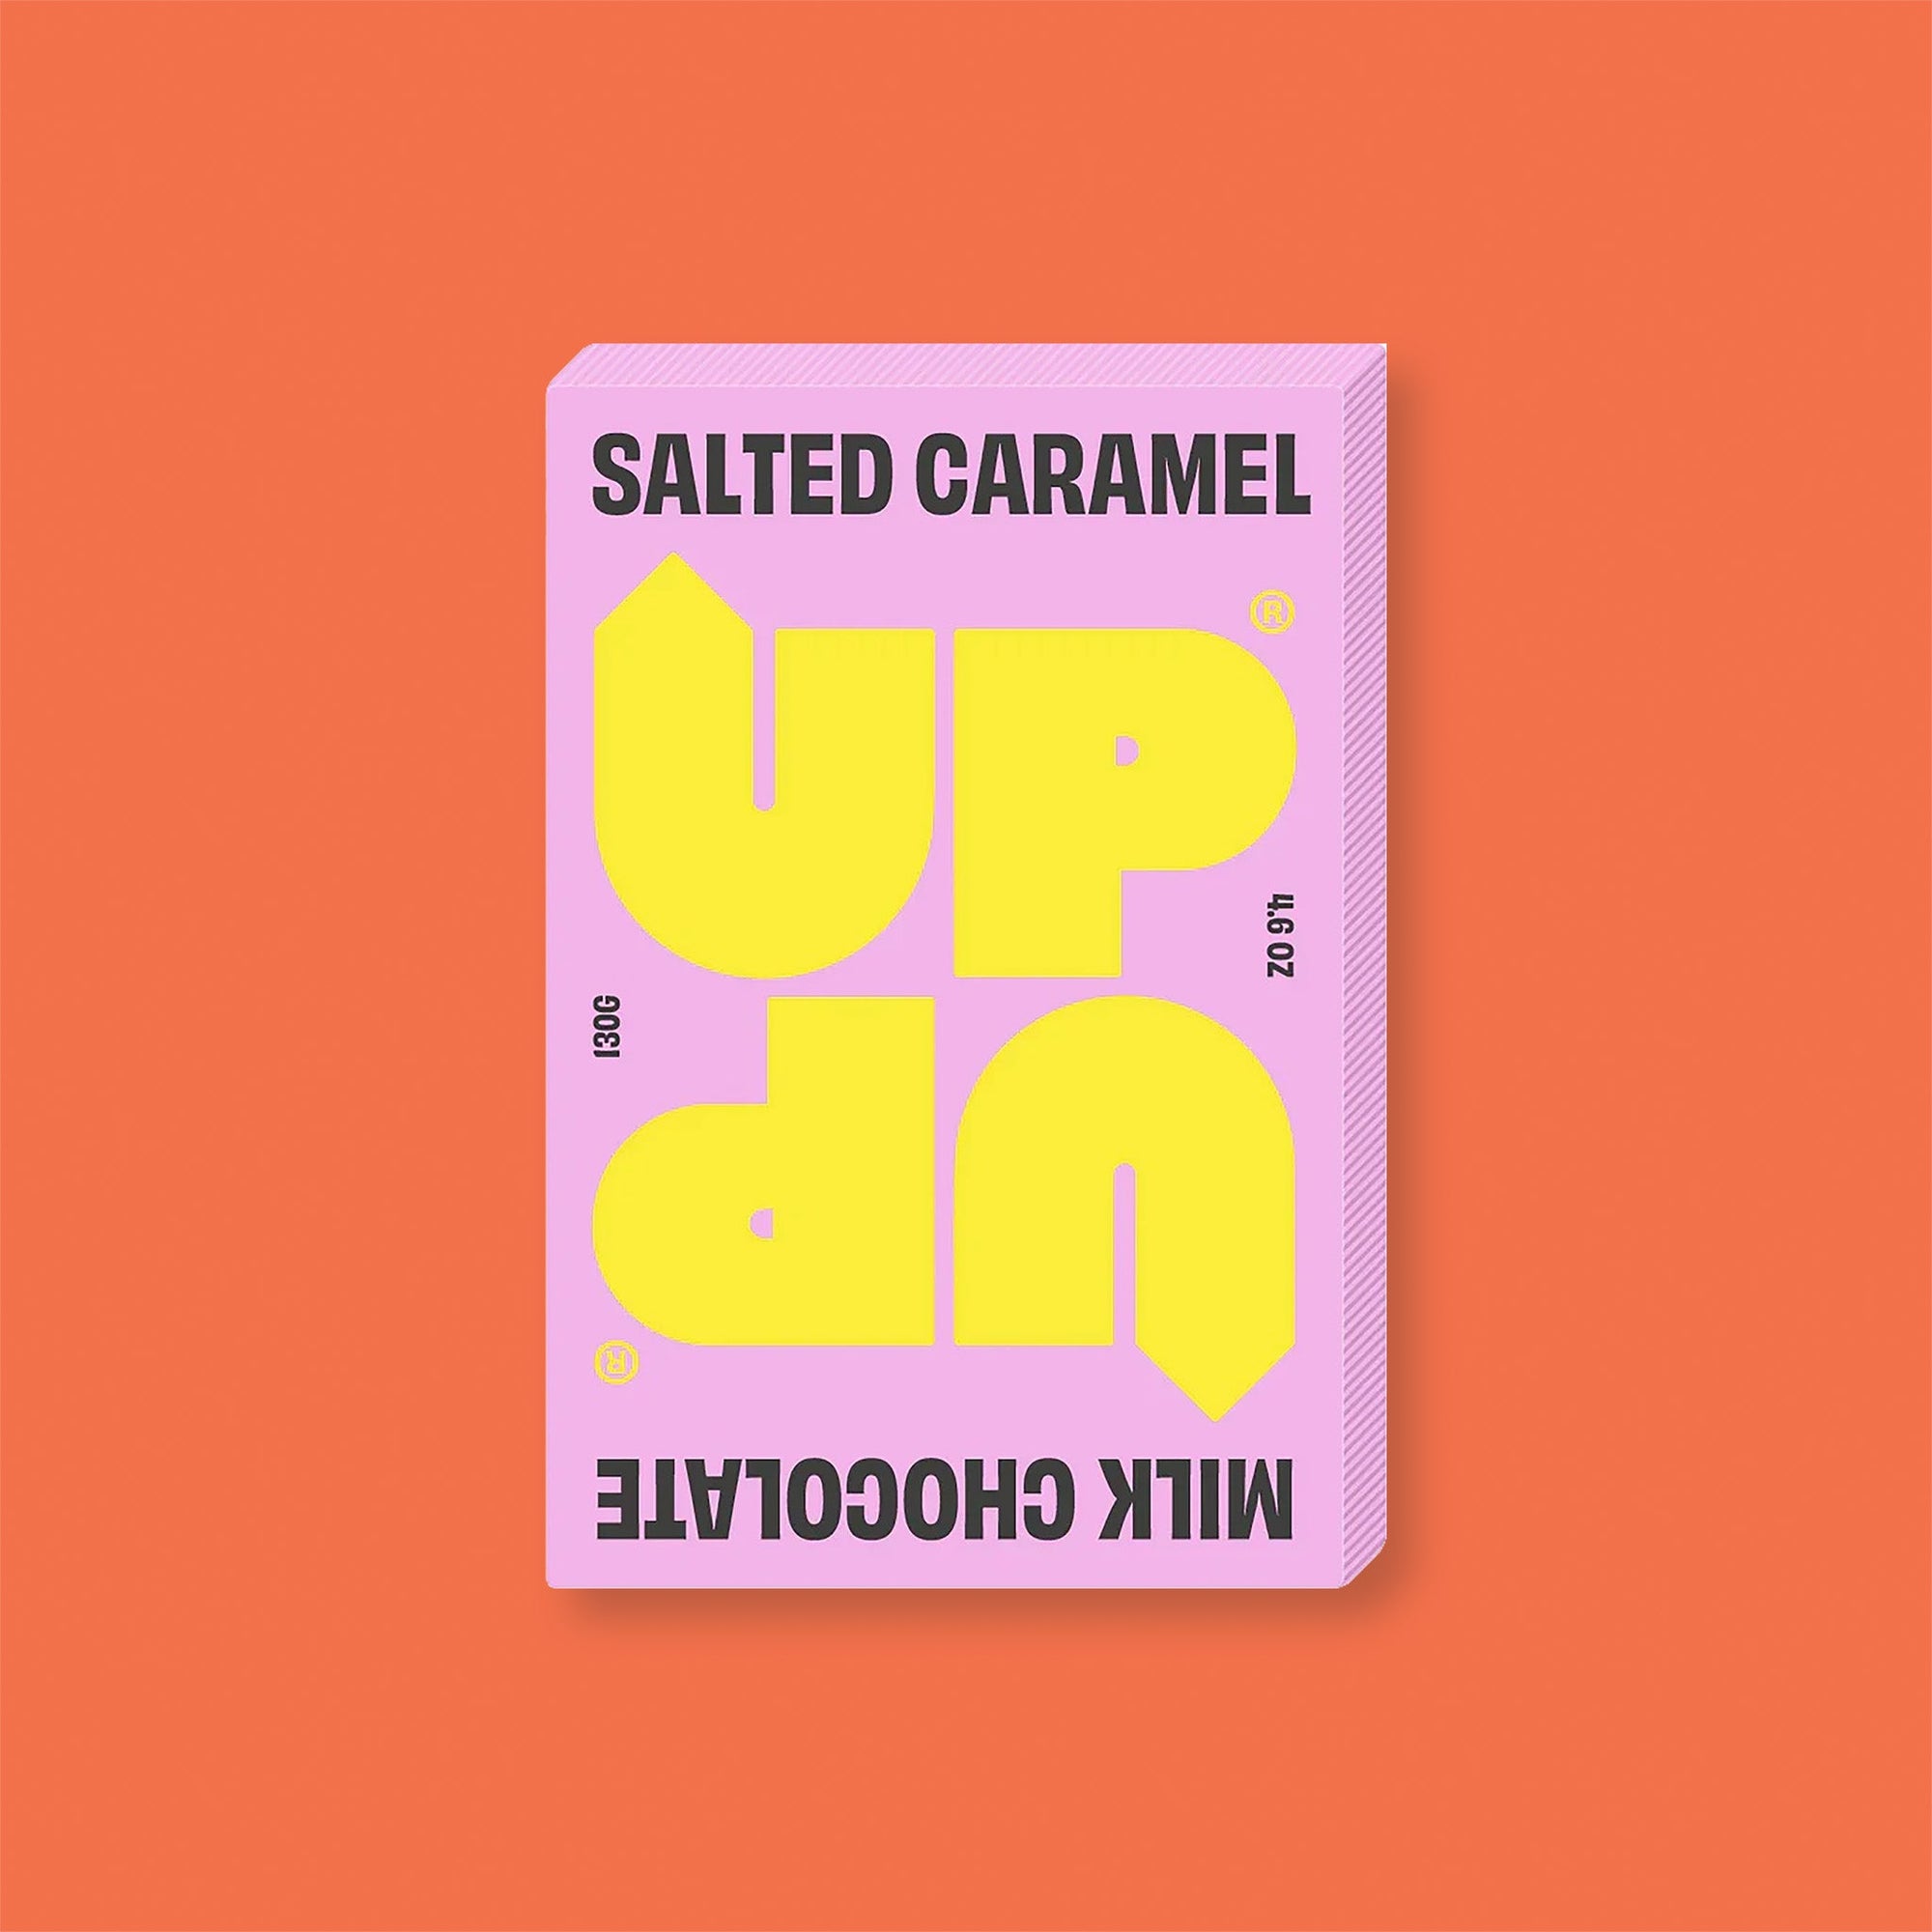 On an orangey-red background sits a box of UP UP Milk Chocolate. The packaging is in mint green and orangey-red.